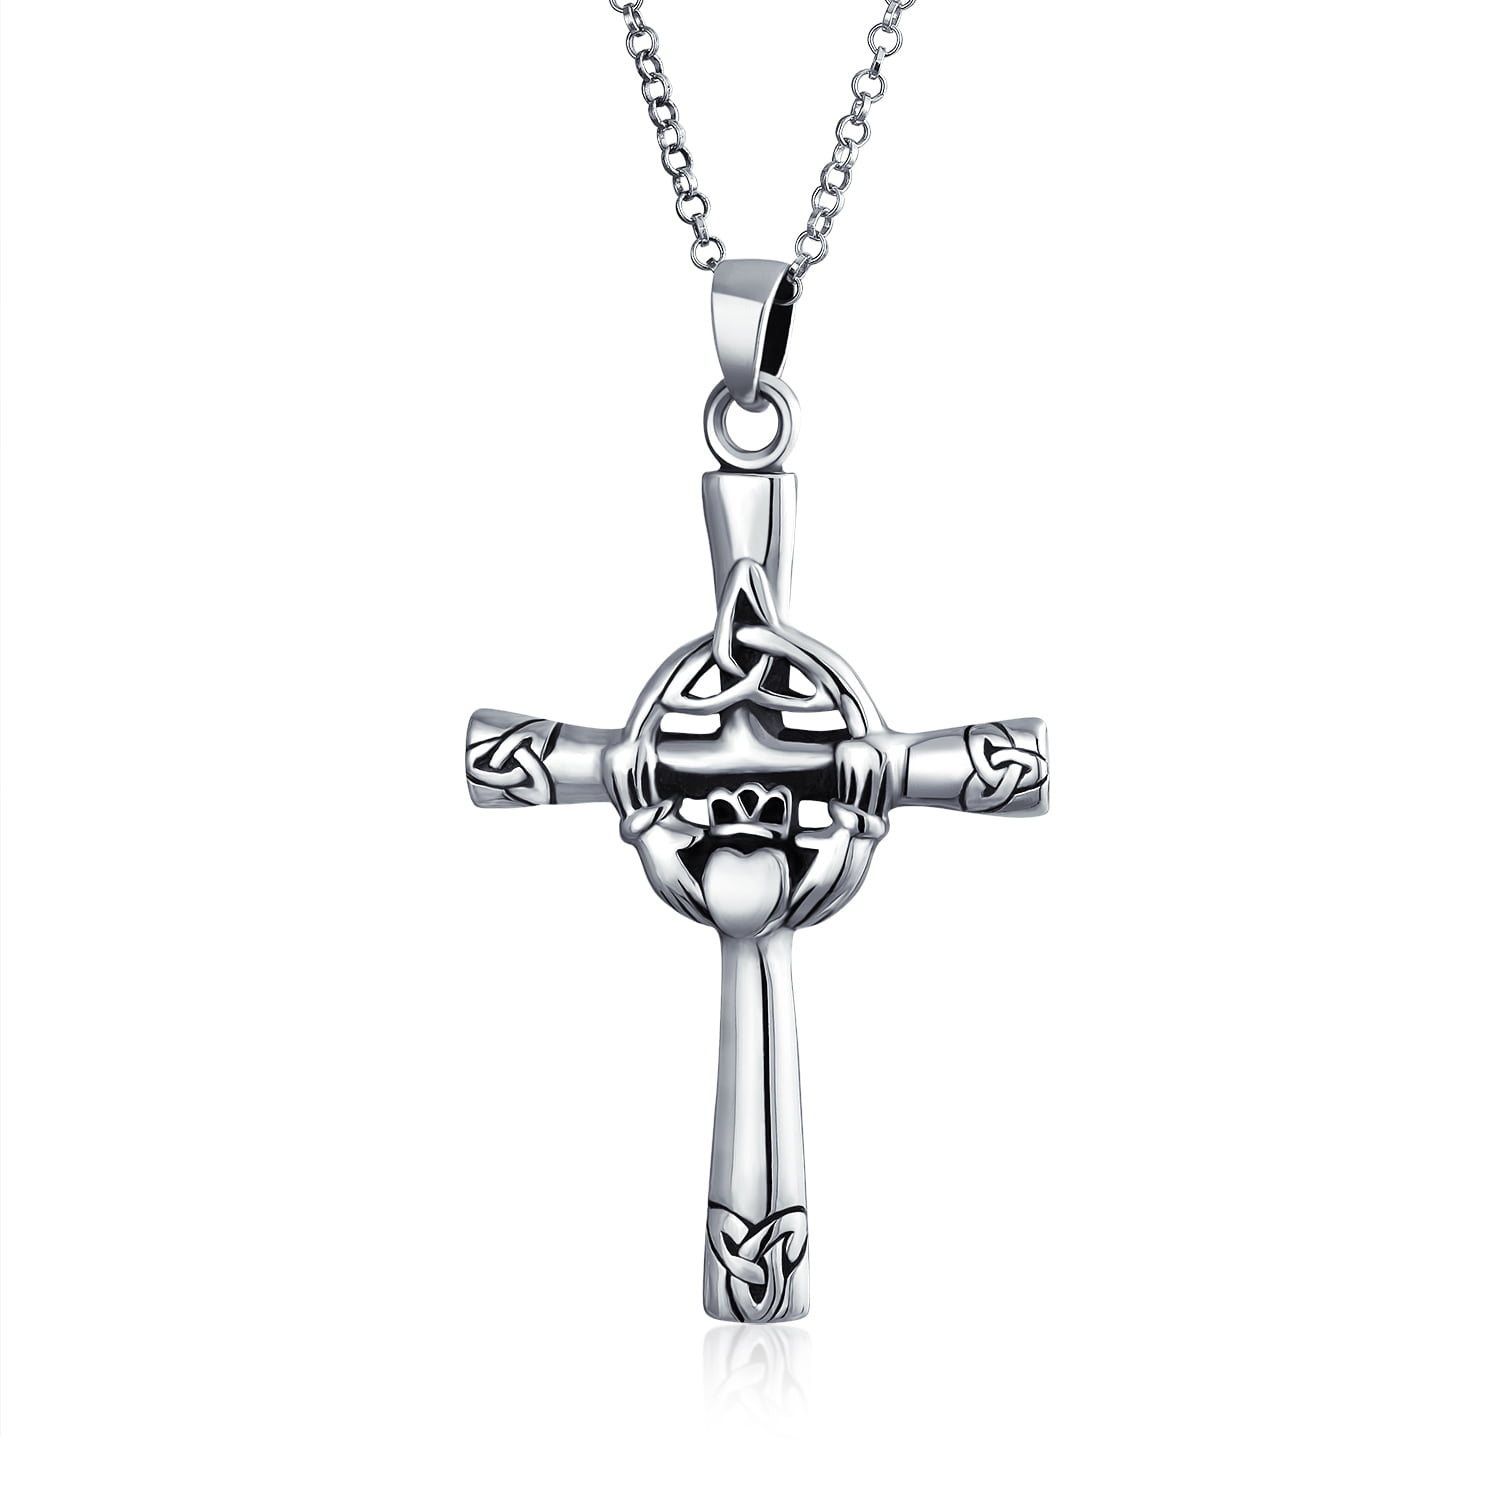 Buy Mahi Cross Pendant with Claddagh Symbol of Crown, Hands, and Heart for  Men and Women (PS1101734R) at Amazon.in